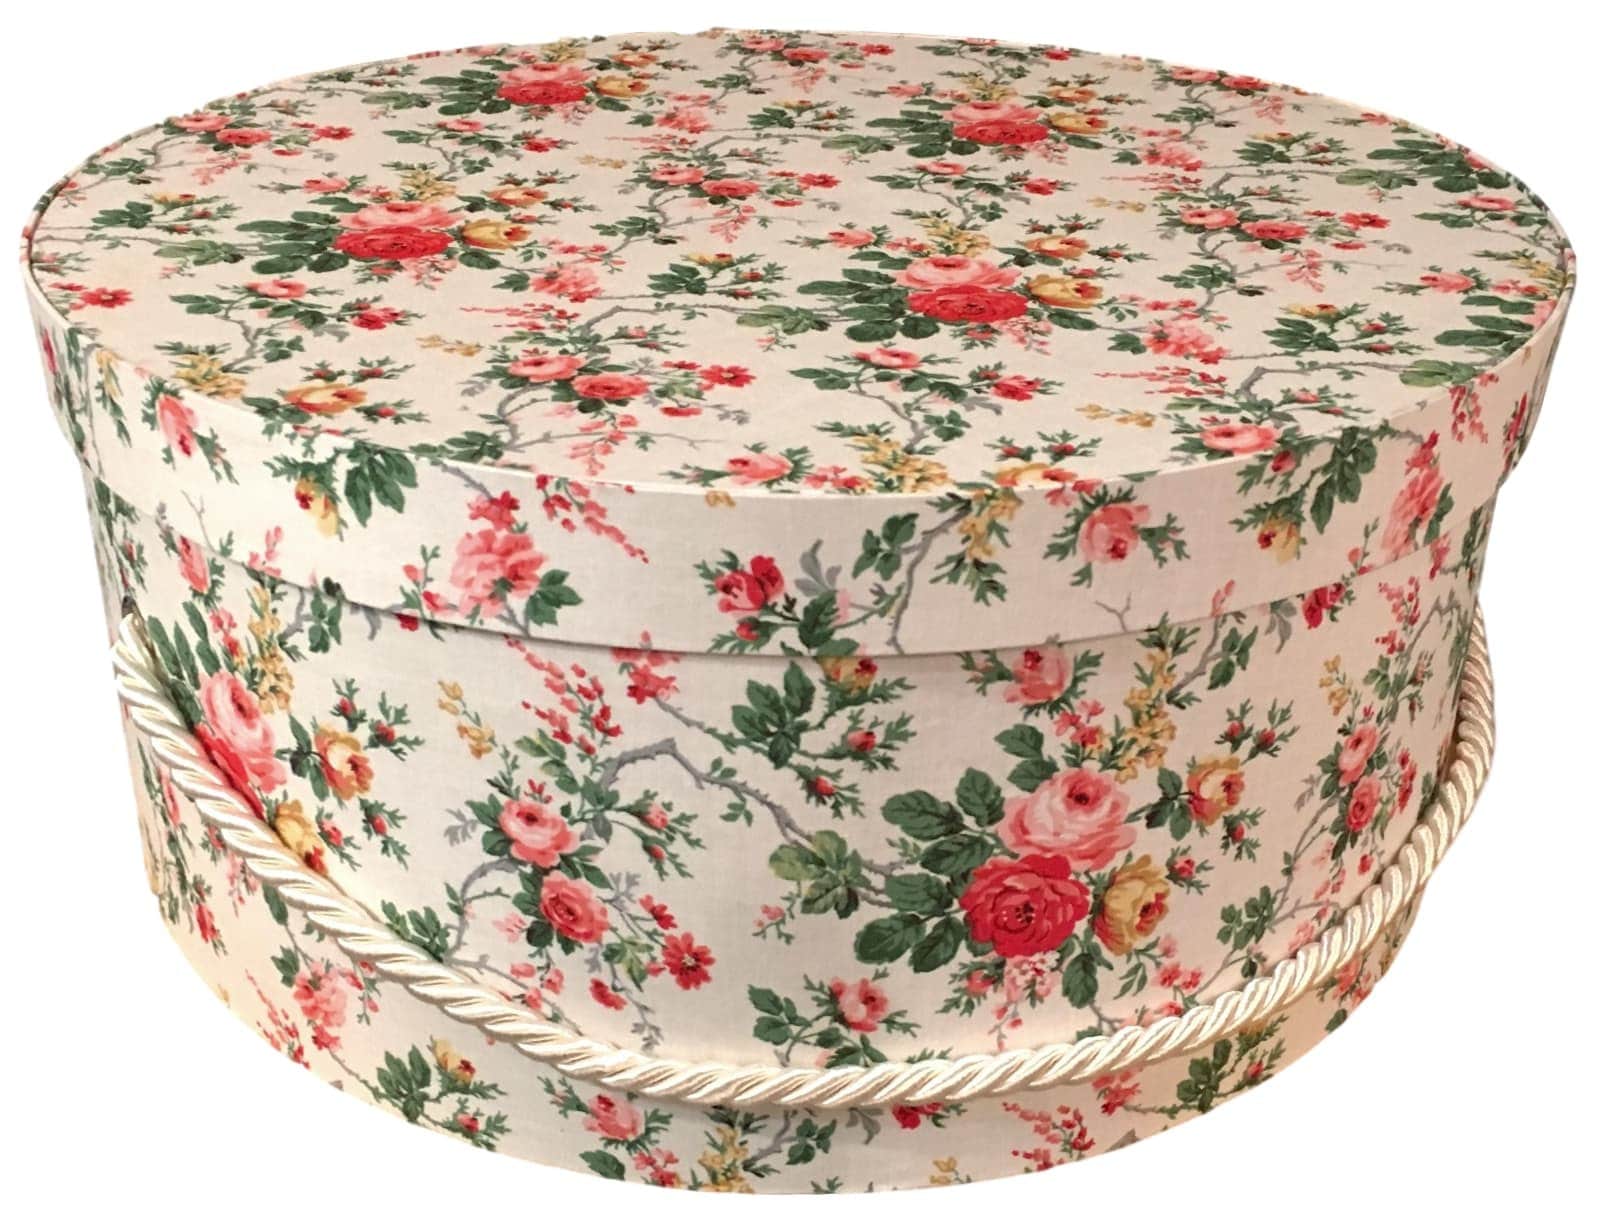 Large Hat Box in Coral Rose, Large Decorative Fabric Covered Hat Boxes ...